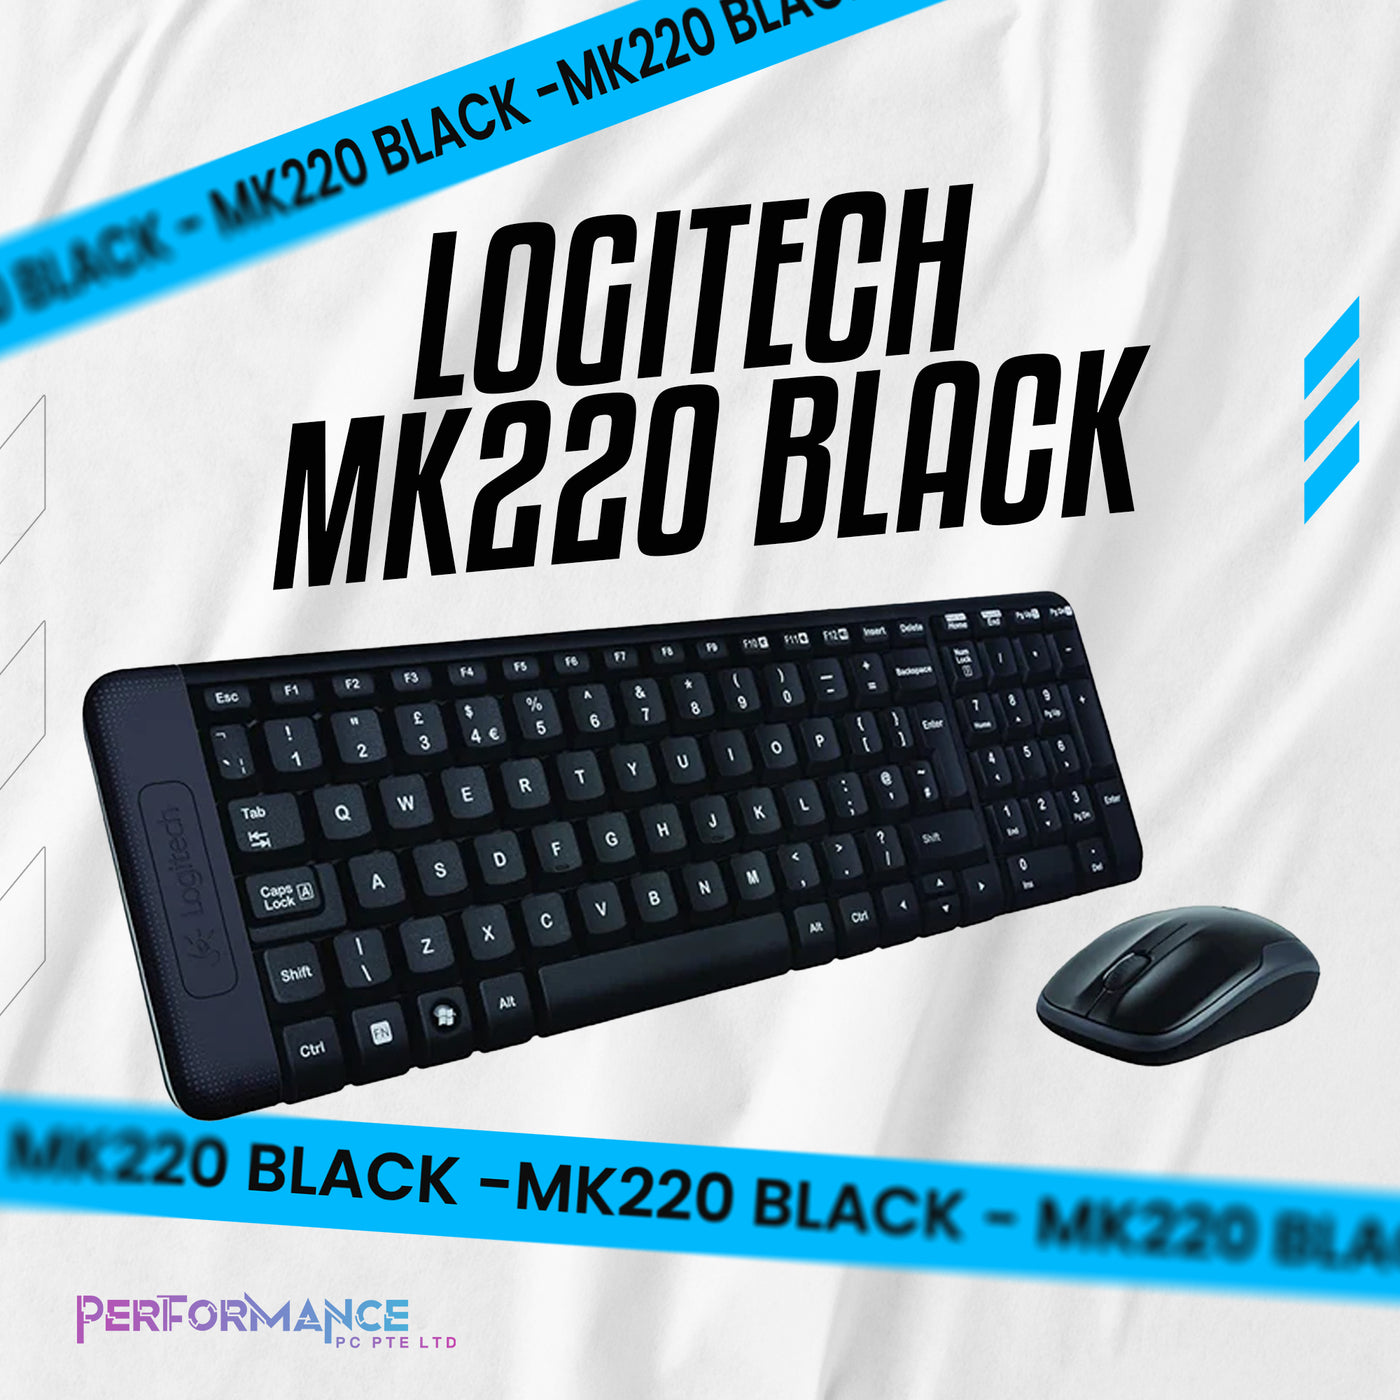 Logitech MK220/MK 220 Combo Set Wireless Keyboard Mouse Compact, Perfect for Office Work/Home Base Learning, Plug and Play (1 YEAR WARRANTY BY PERFORMANCE PC PTE LTD)